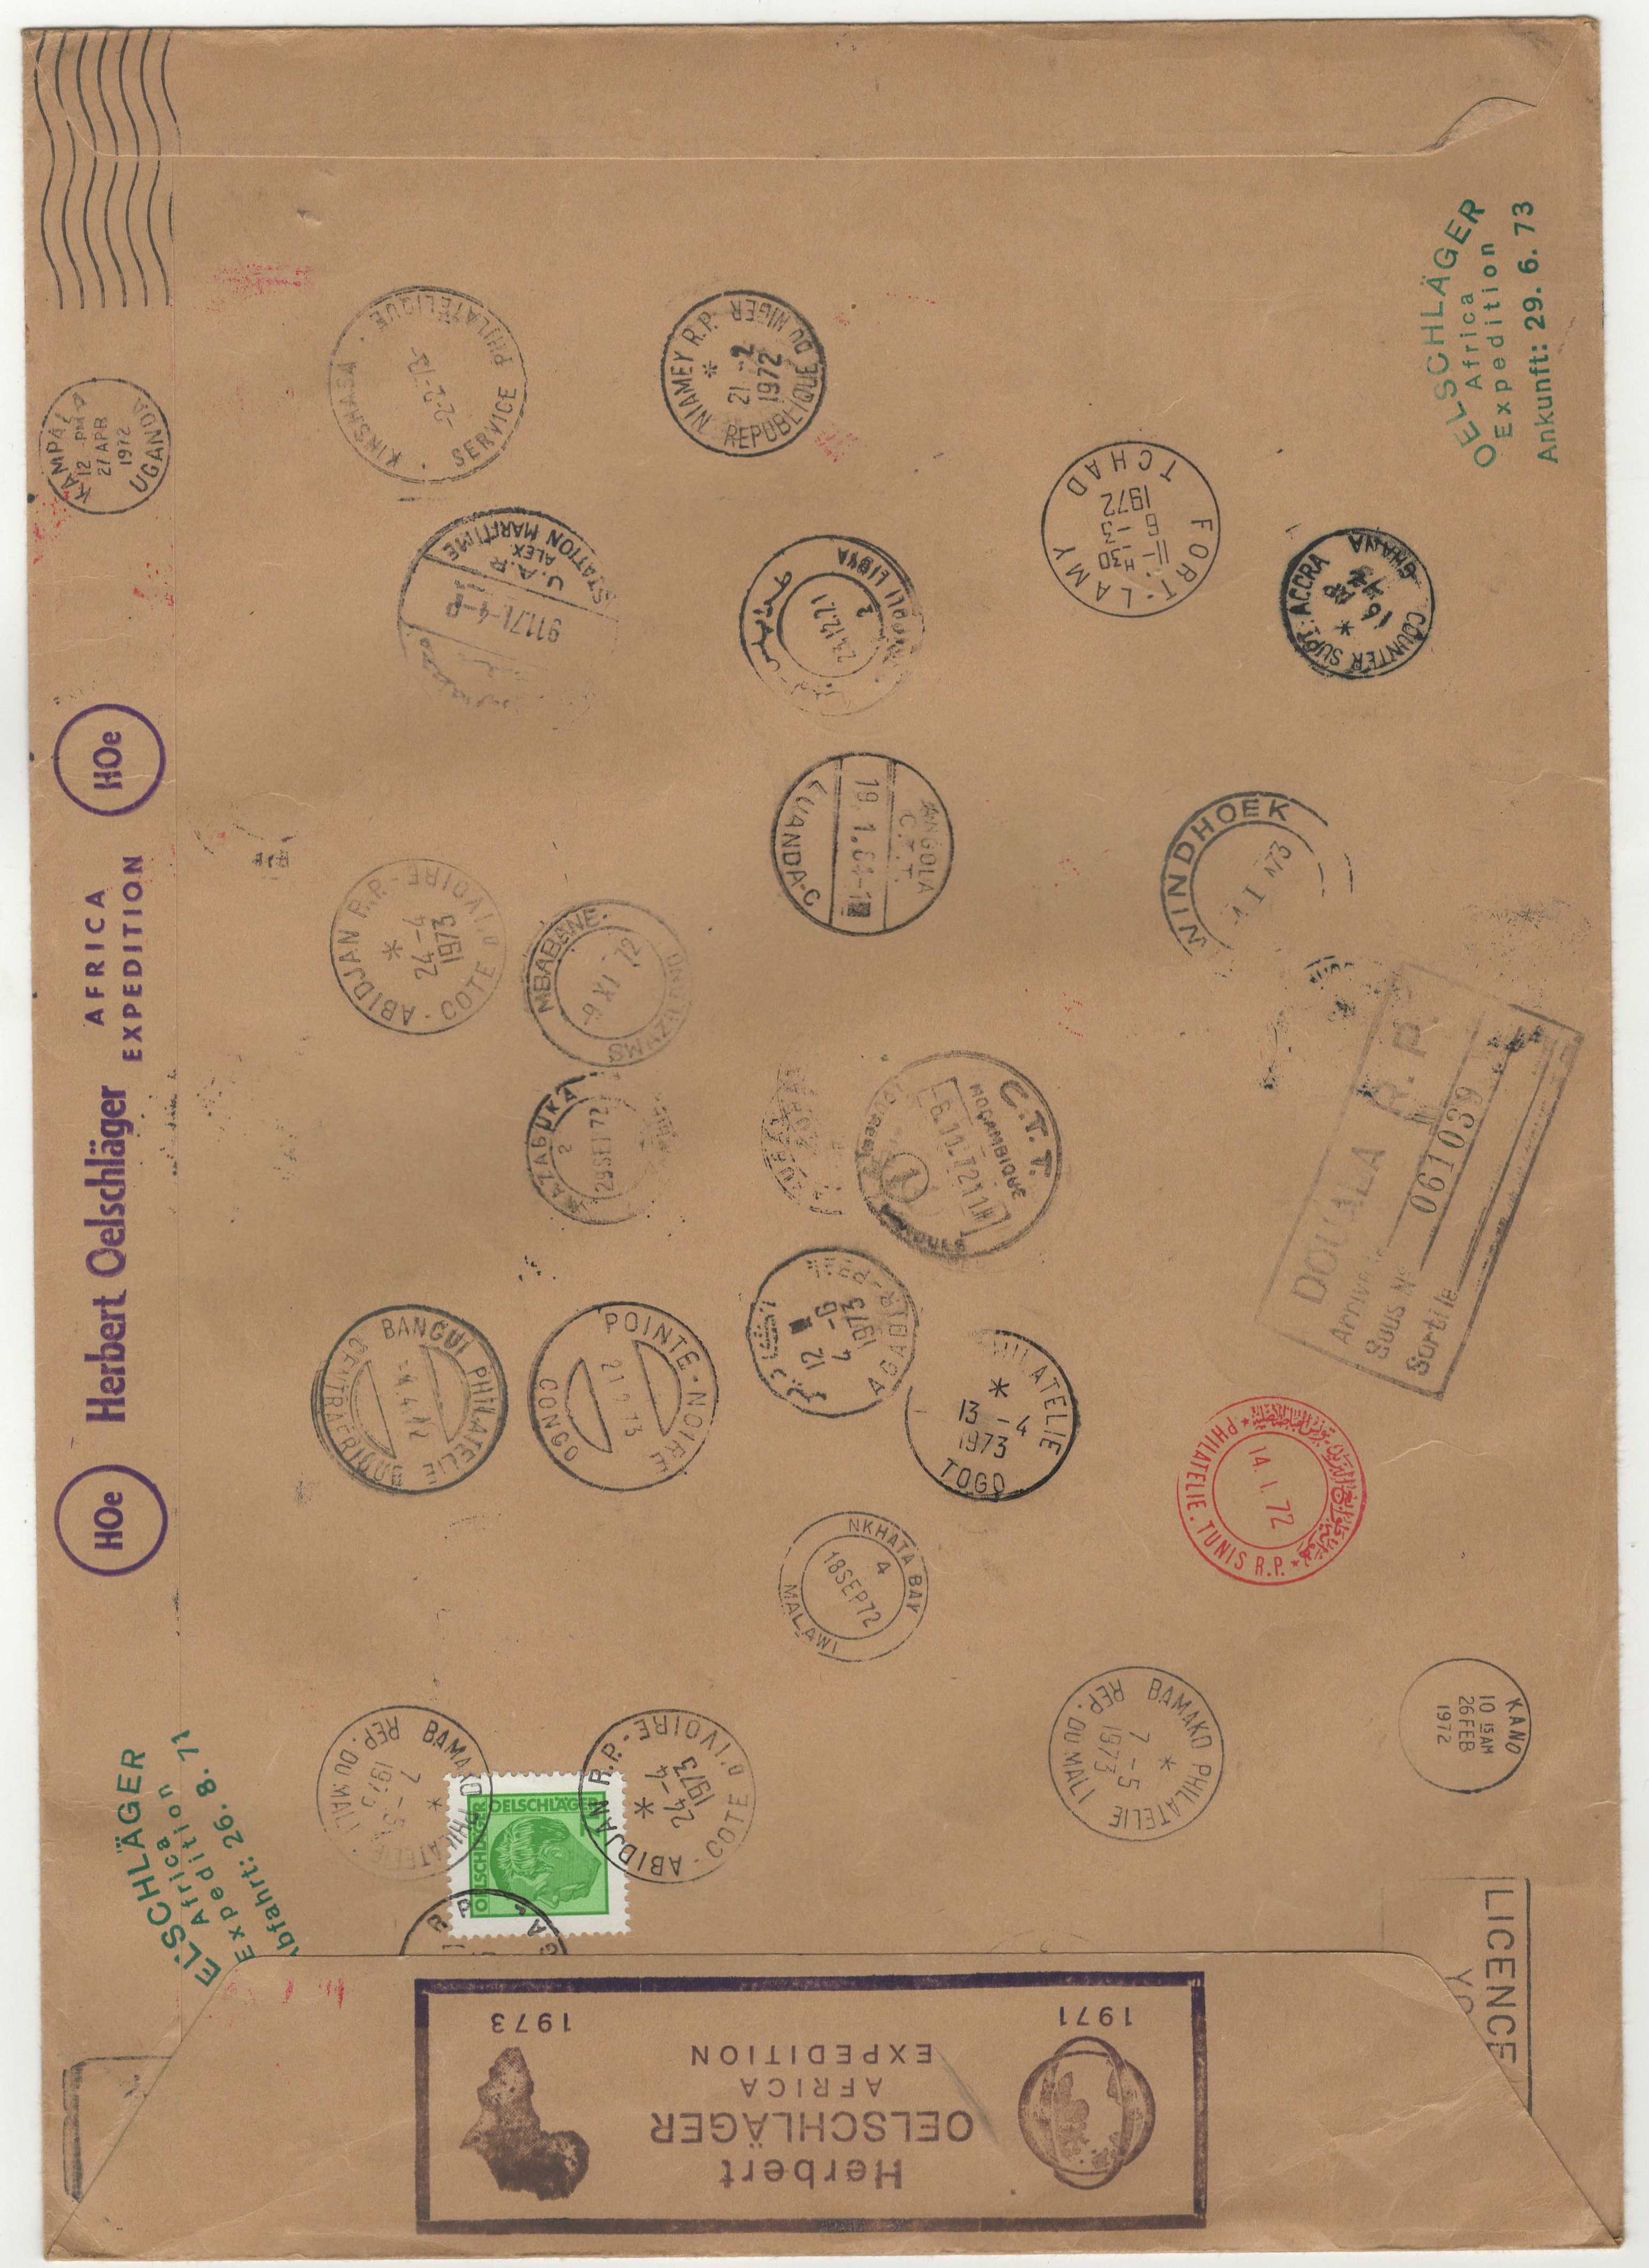 Germany 1971-1973-Africa Expedition-Interesting postal history item-numbered and certificated - Image 3 of 3